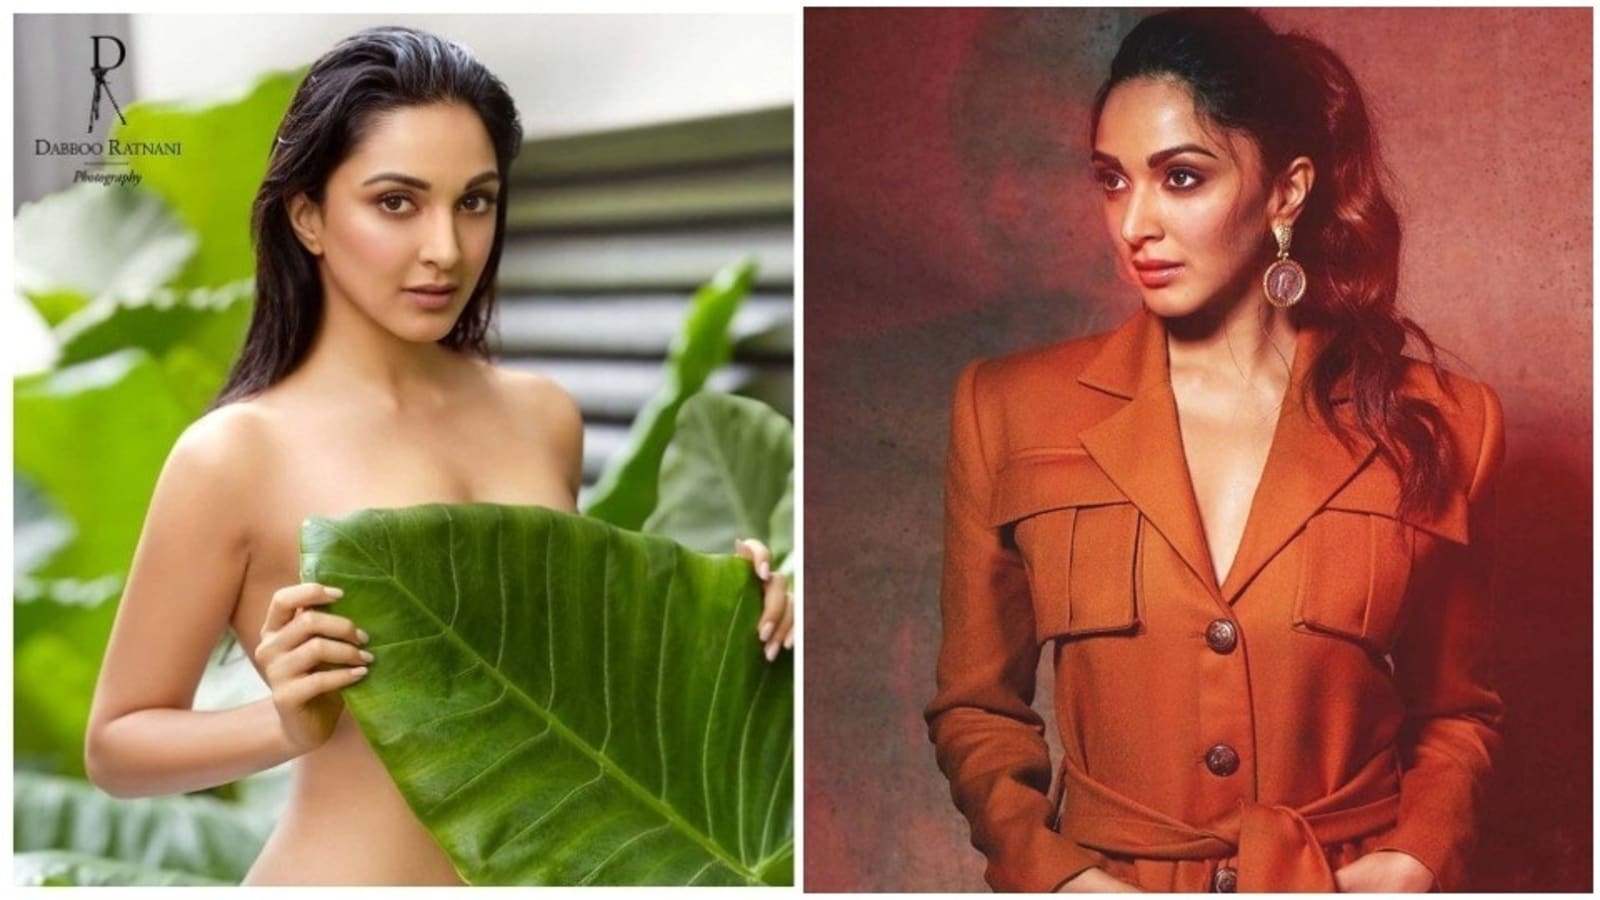 Kiara Advani says ‘eww’ to creepy comment about her leaf photoshoot. Watch